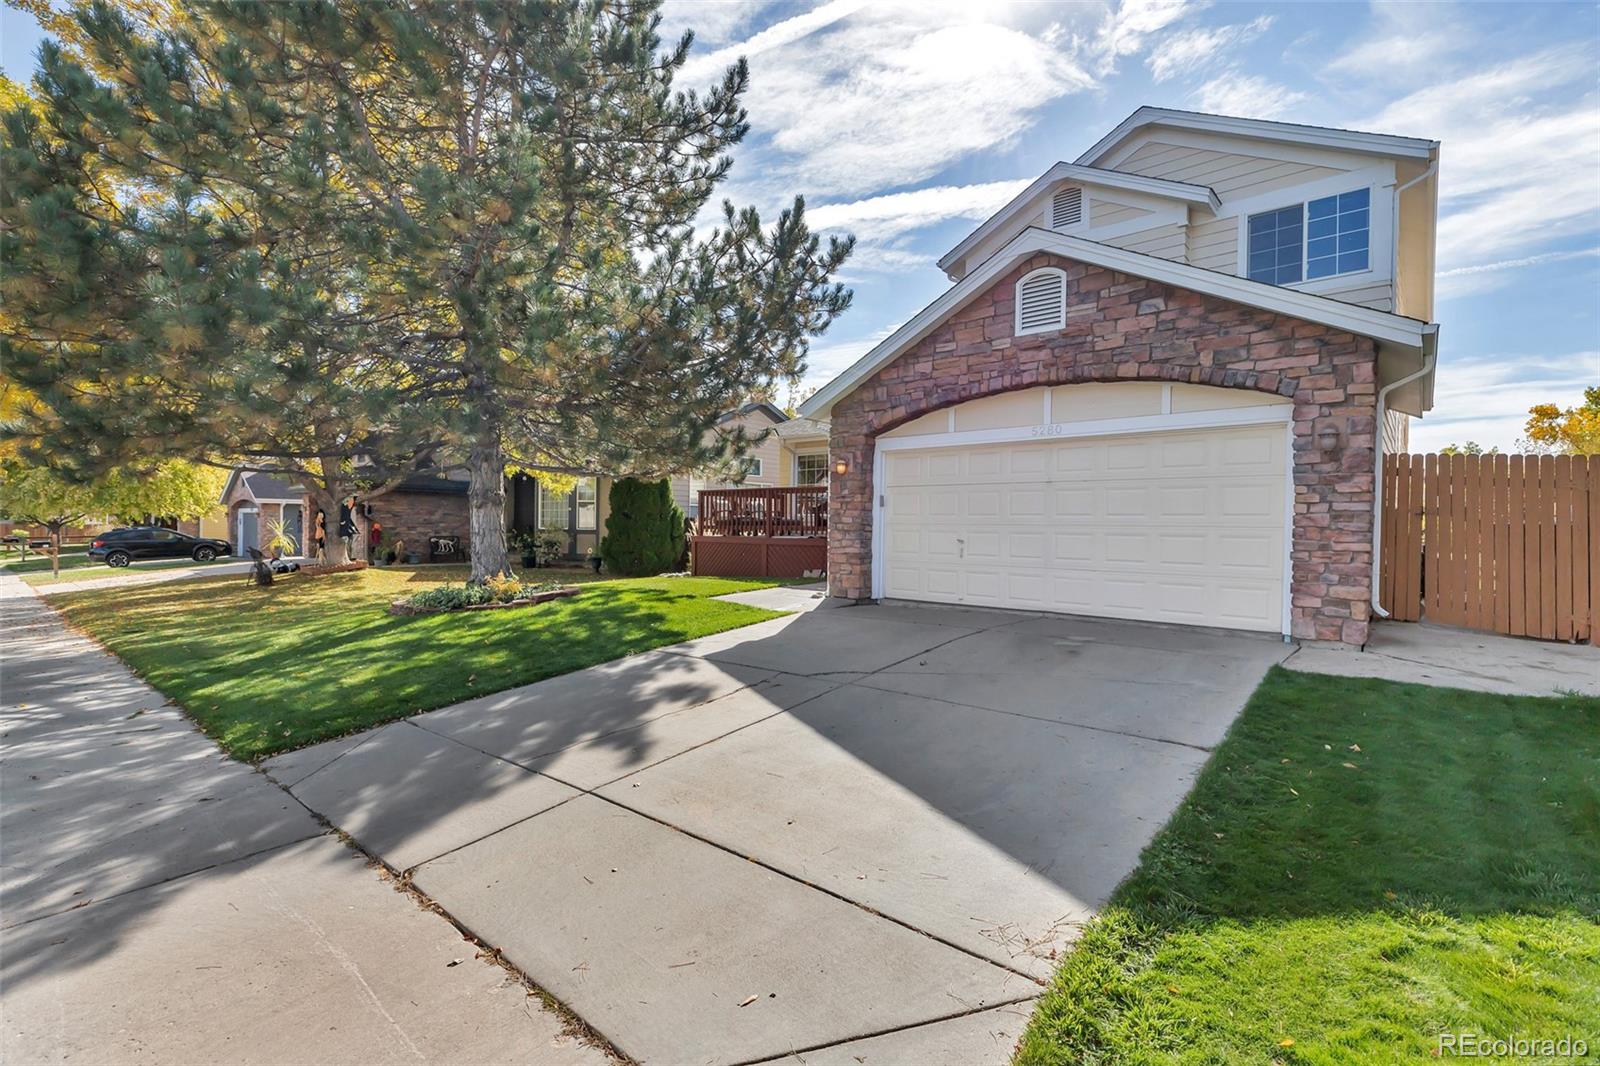 5280 e 130th way, Thornton sold home. Closed on 2024-01-12 for $575,000.